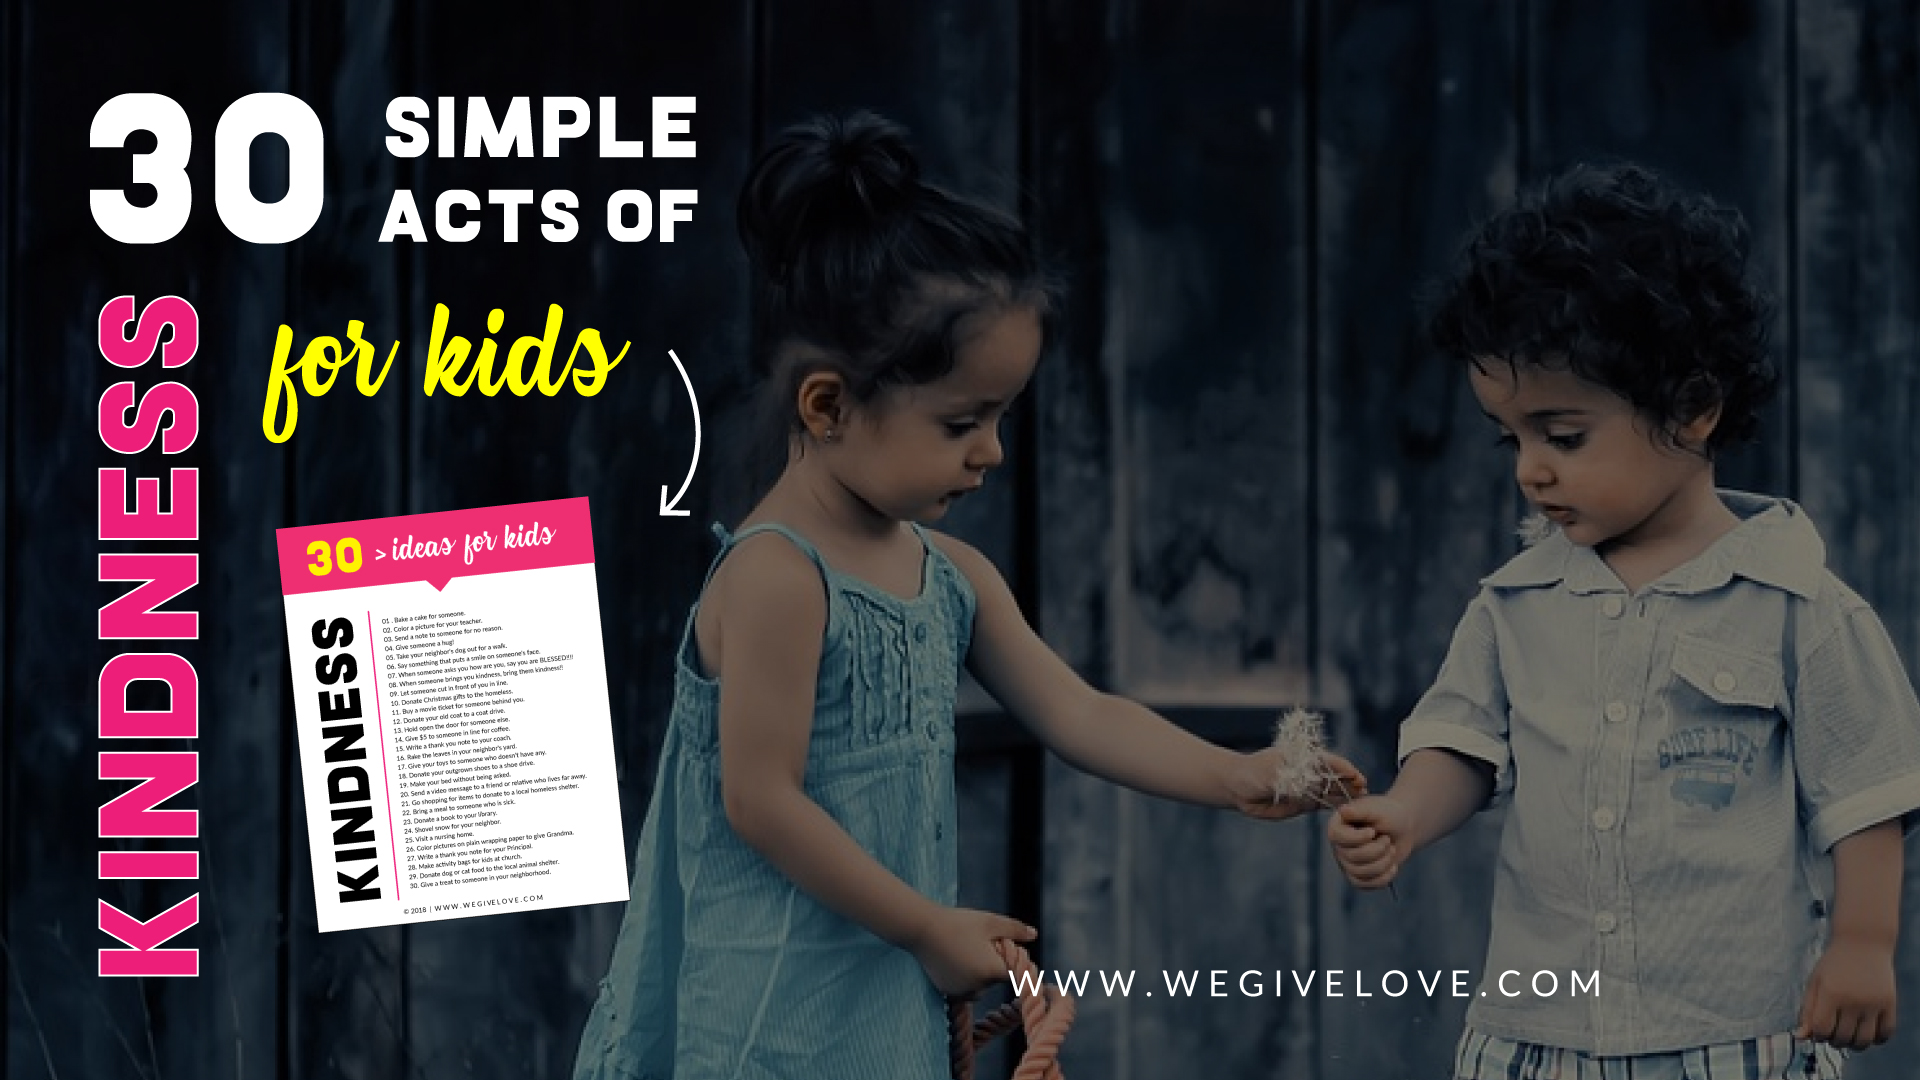 30 simple acts of kindness ideas for kids free printable list | wegivelove.com